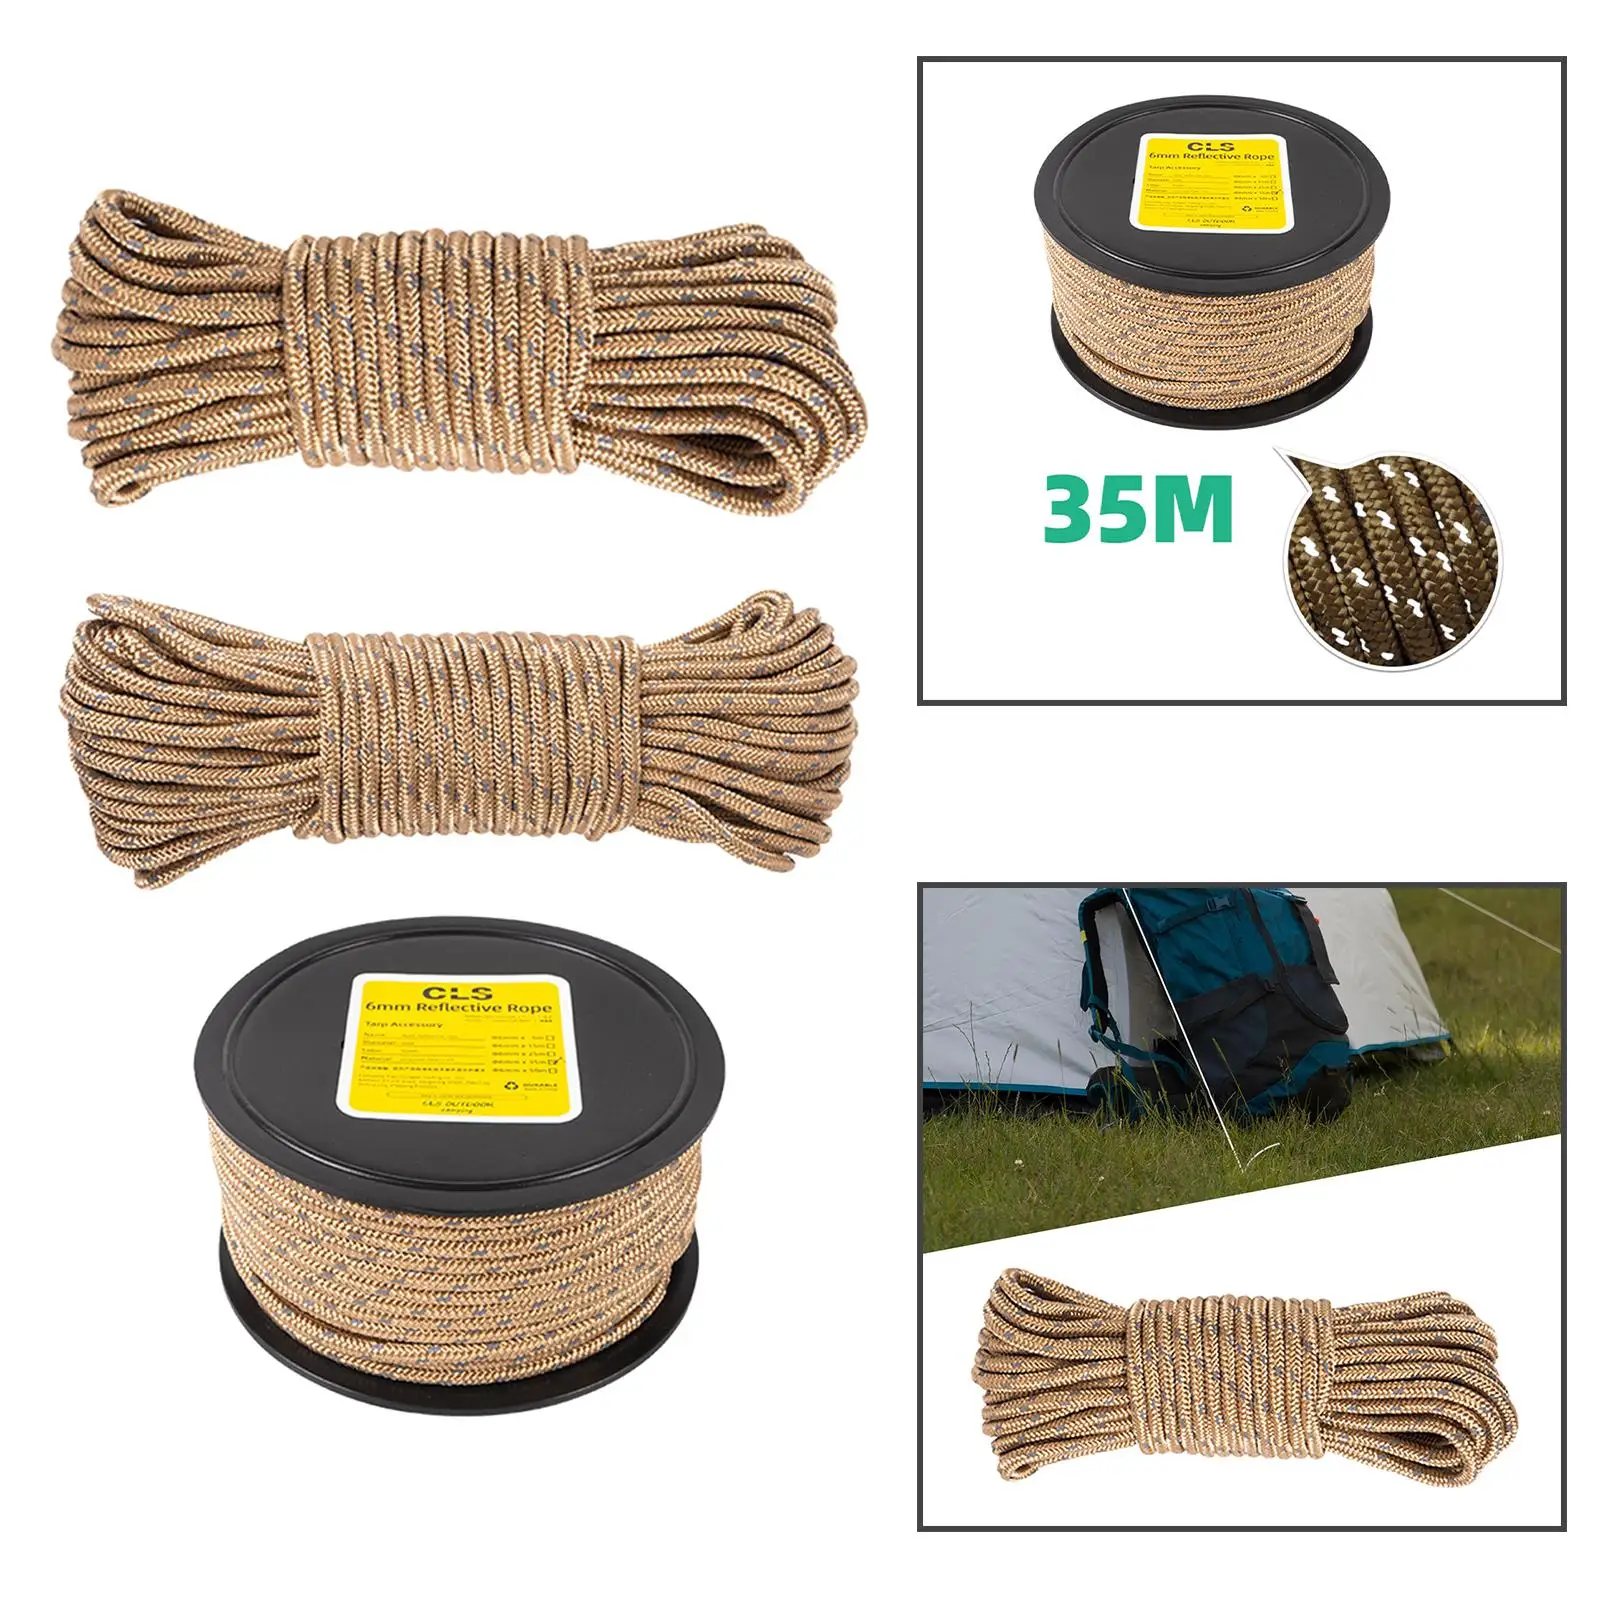 Guylines Weather Resistant Solid Braid Lanyard Camping Rope Guy Lines Tent Rope for Travel Hiking Outdoor Activities Awning Tent